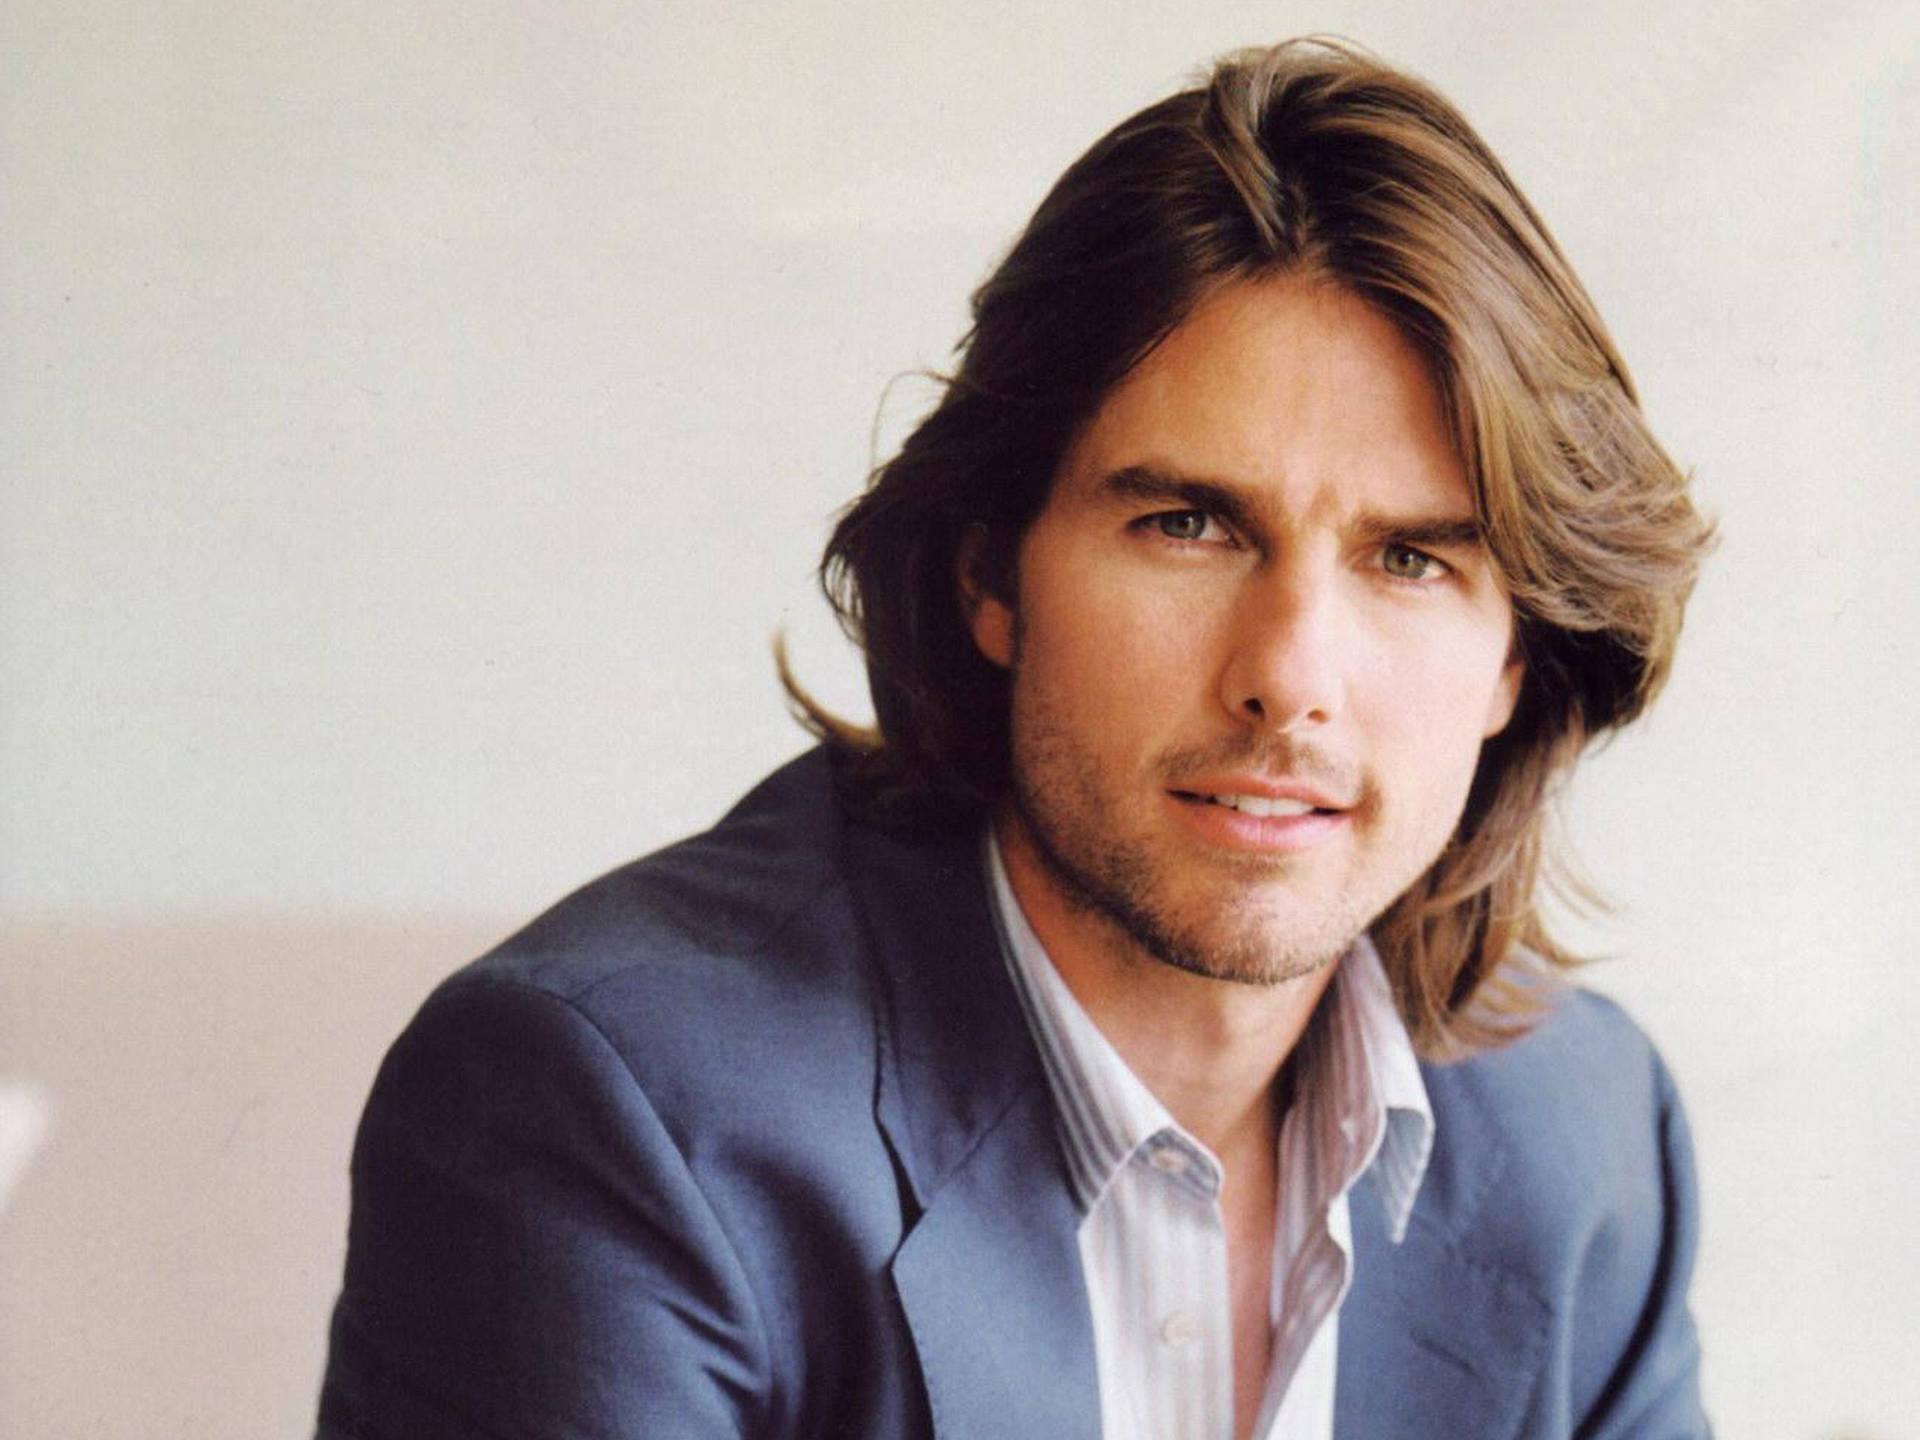 Long-haired Tom Cruise